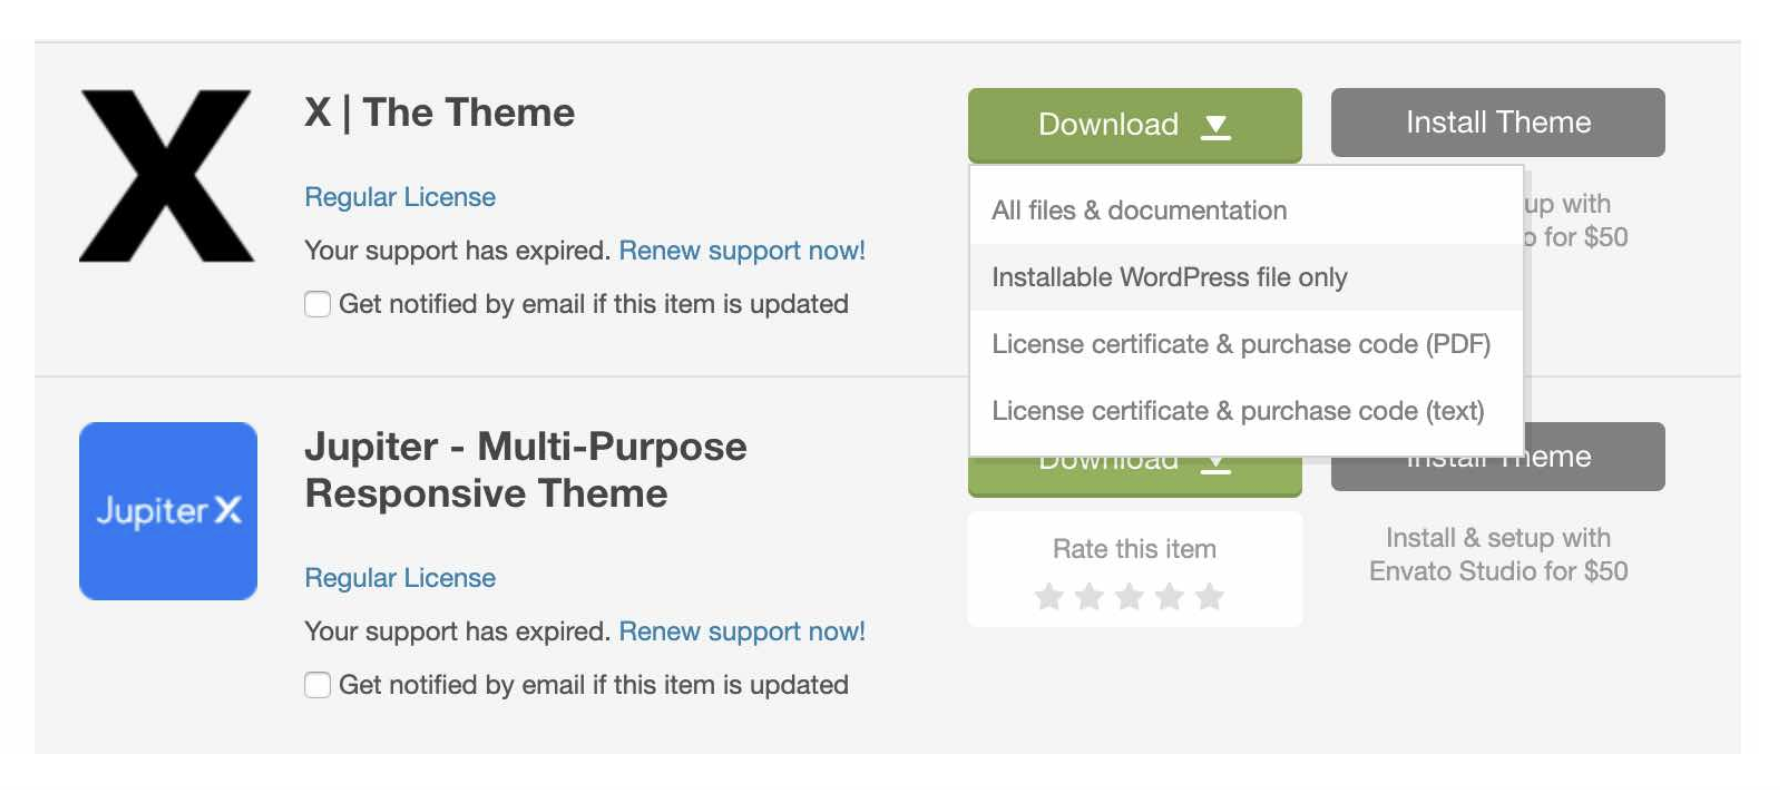 Themeforest allows you to download an installable WordPress file.